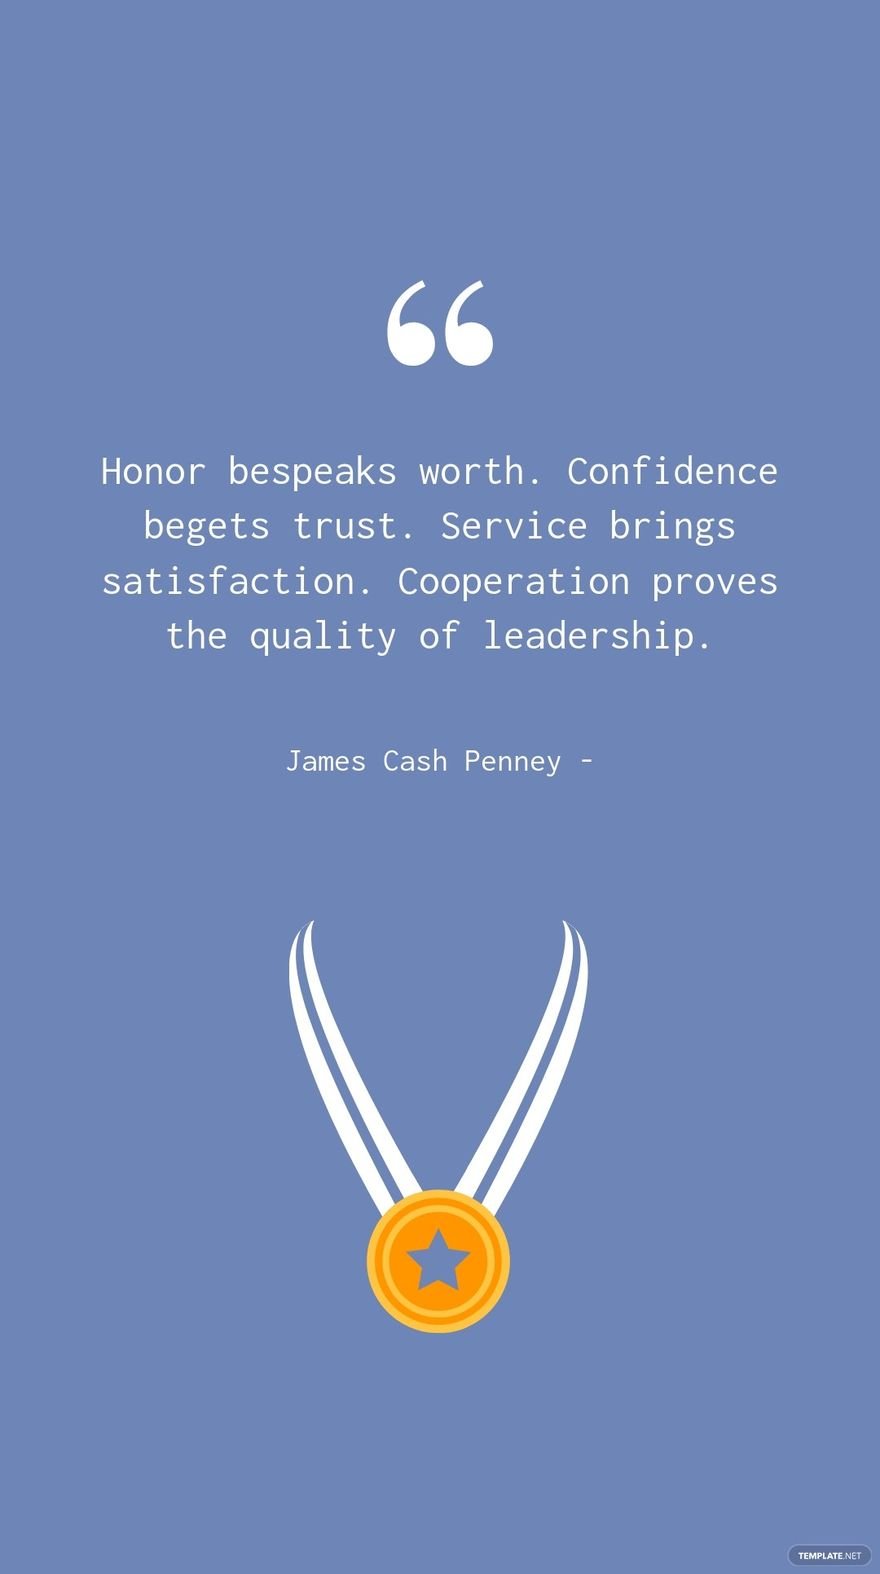 Free James Cash Penney - Honor bespeaks worth. Confidence begets trust. Service brings satisfaction. Cooperation proves the quality of leadership.